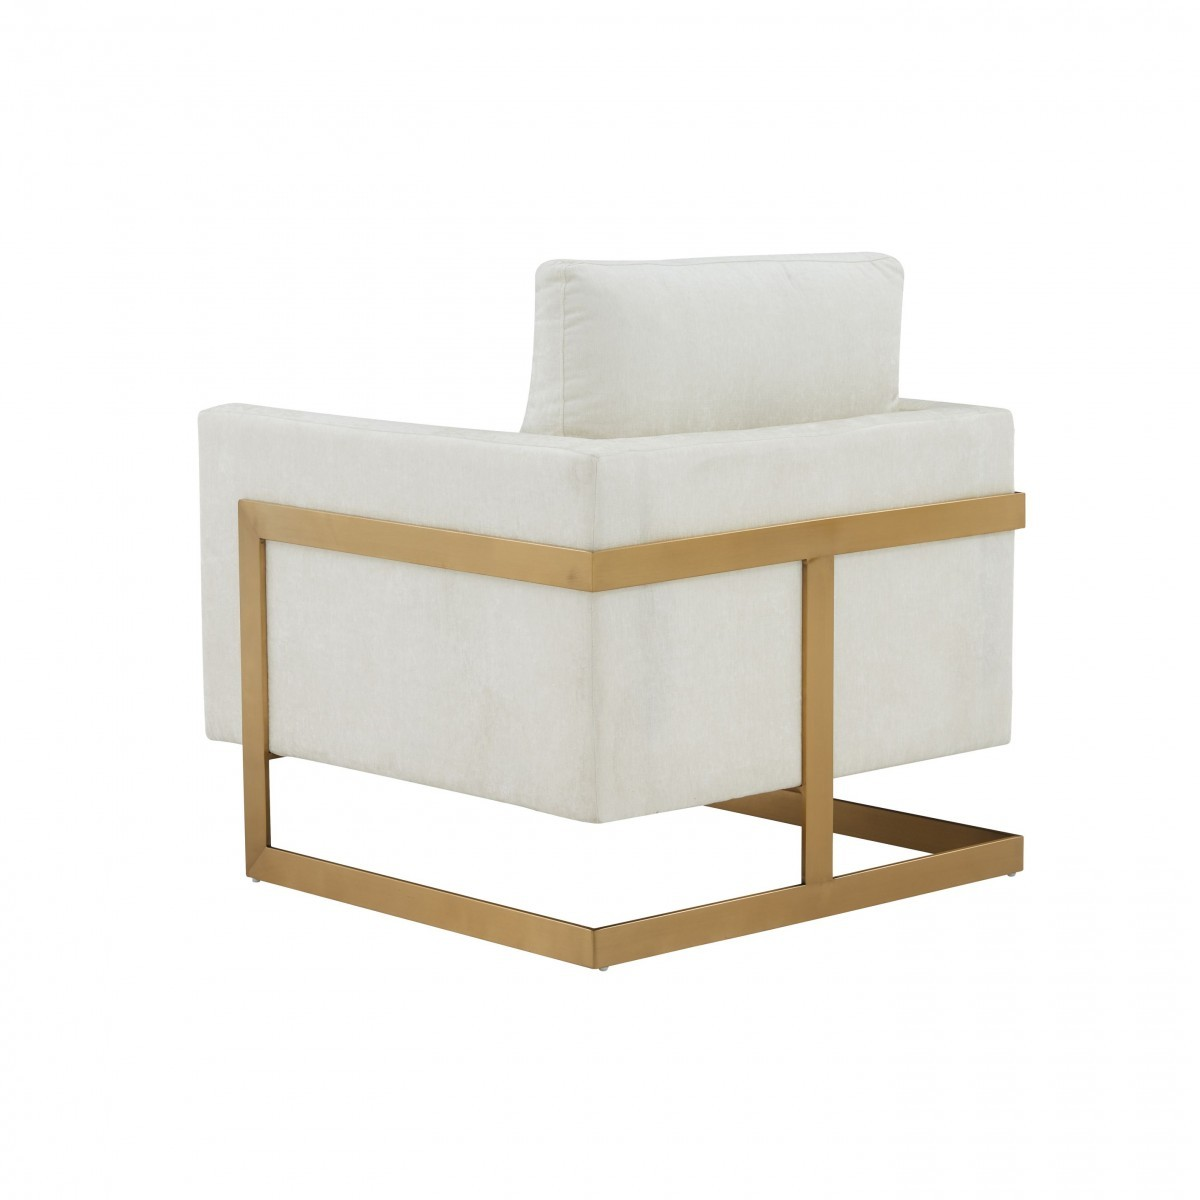 "31"" Cream And Gold 100% Polyester Arm Chair"